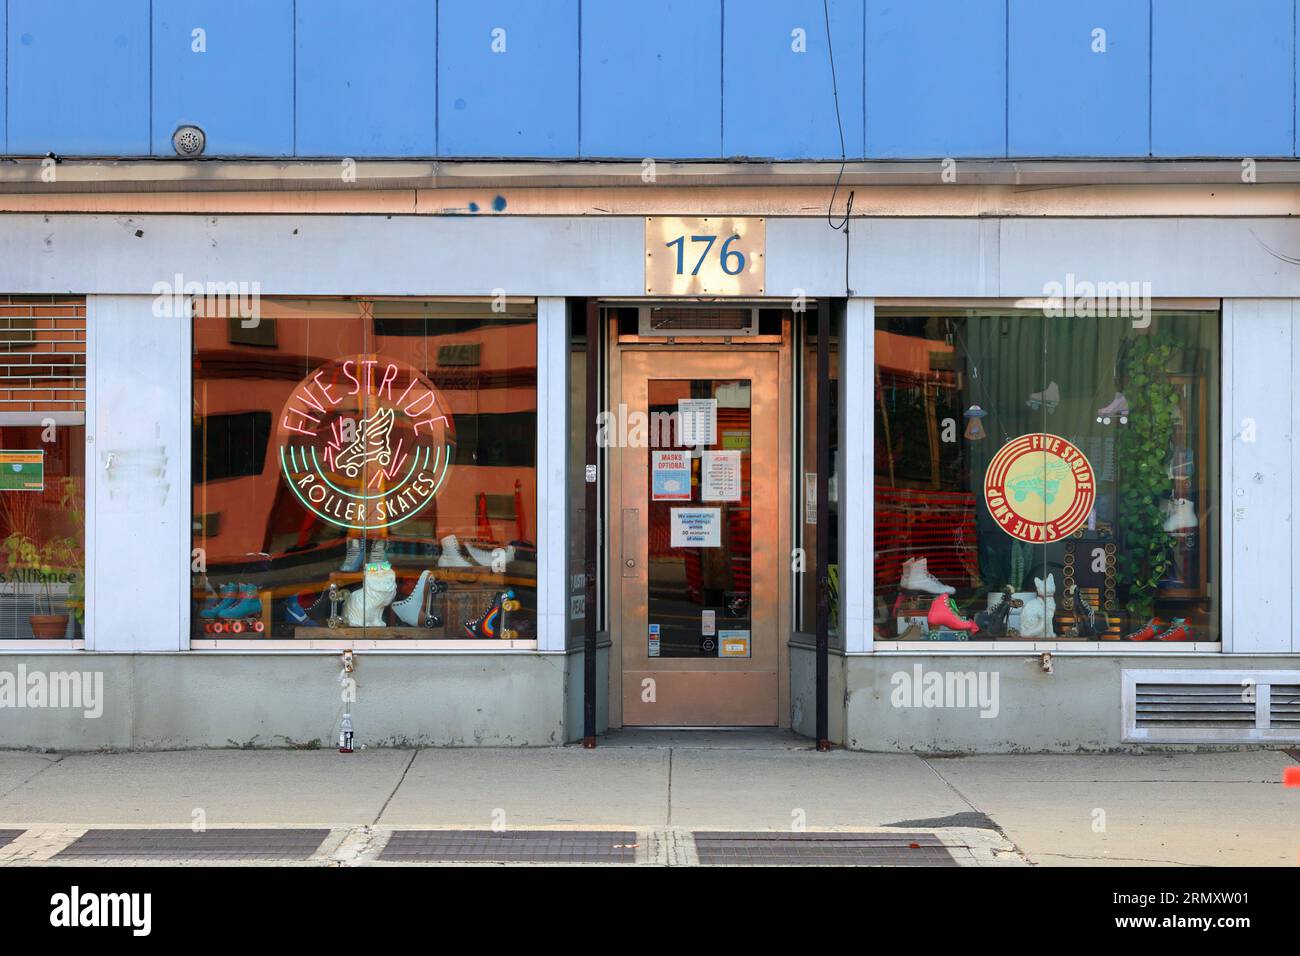 Five Stride Skate Shop, 176 Bushwick Ave, Brooklyn, New York. NYC storefront photo of a roller skate shop in Williamsburg. Stock Photo